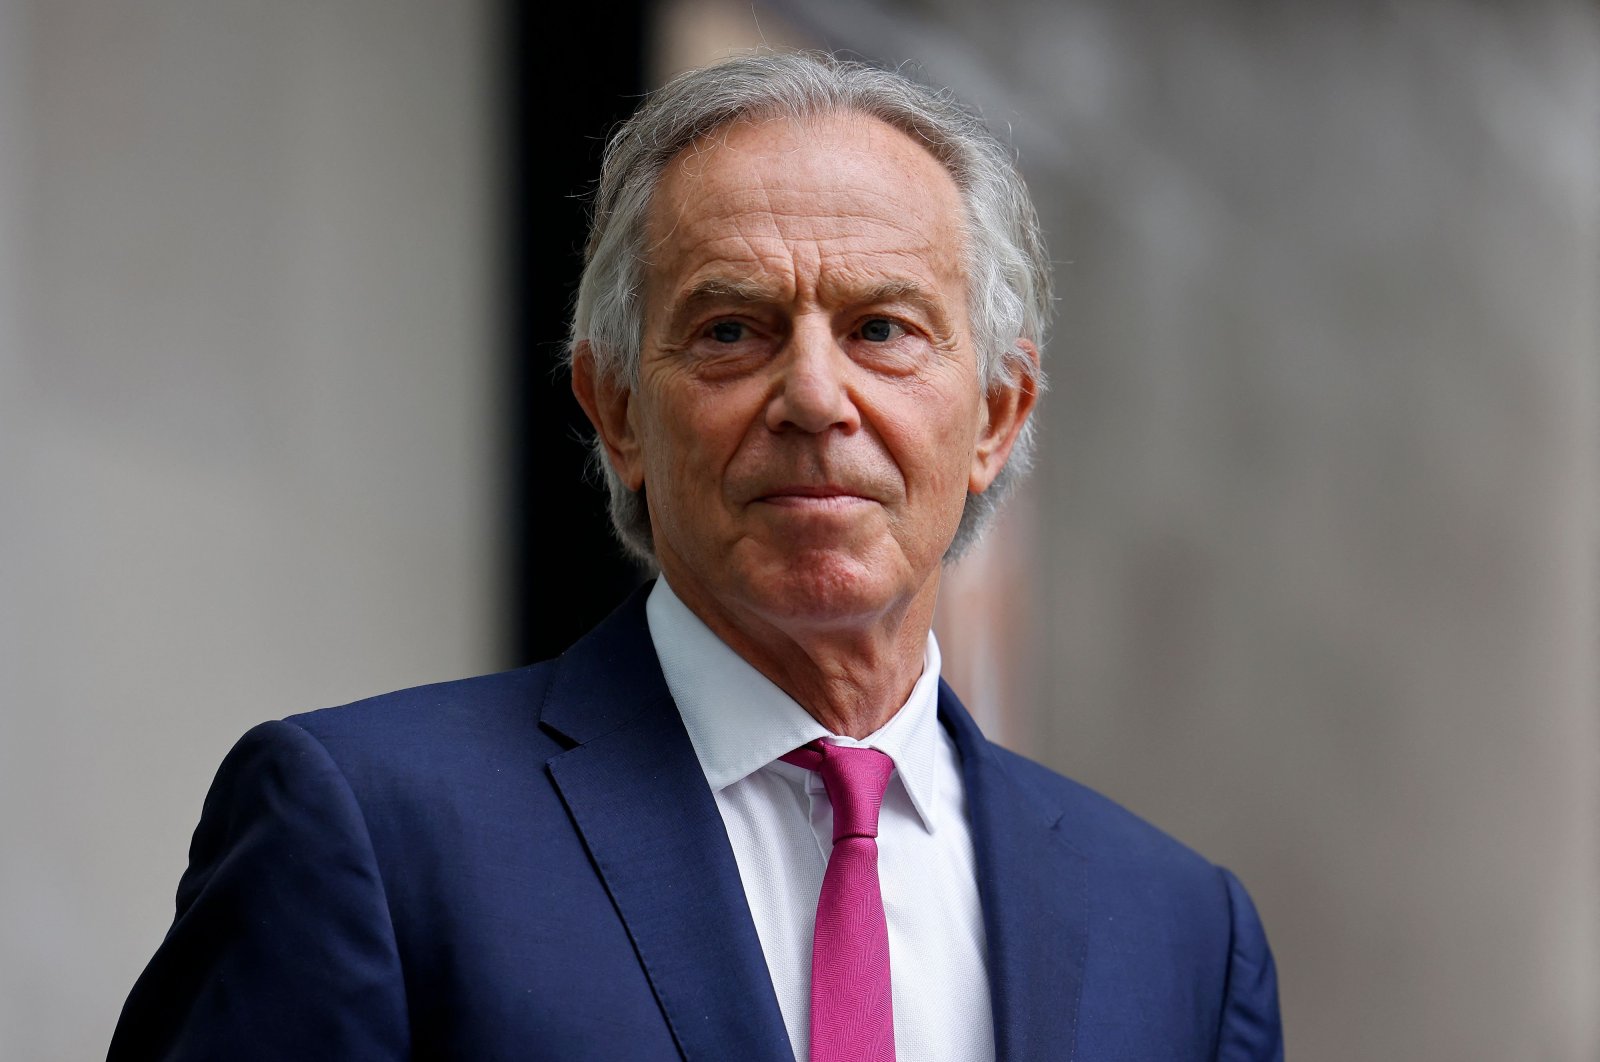 Former British Prime Minister Tony Blair leaves the BBC after appearing on "The Andrew Marr Show," central London, U.K., June 6, 2021. (AFP Photo)